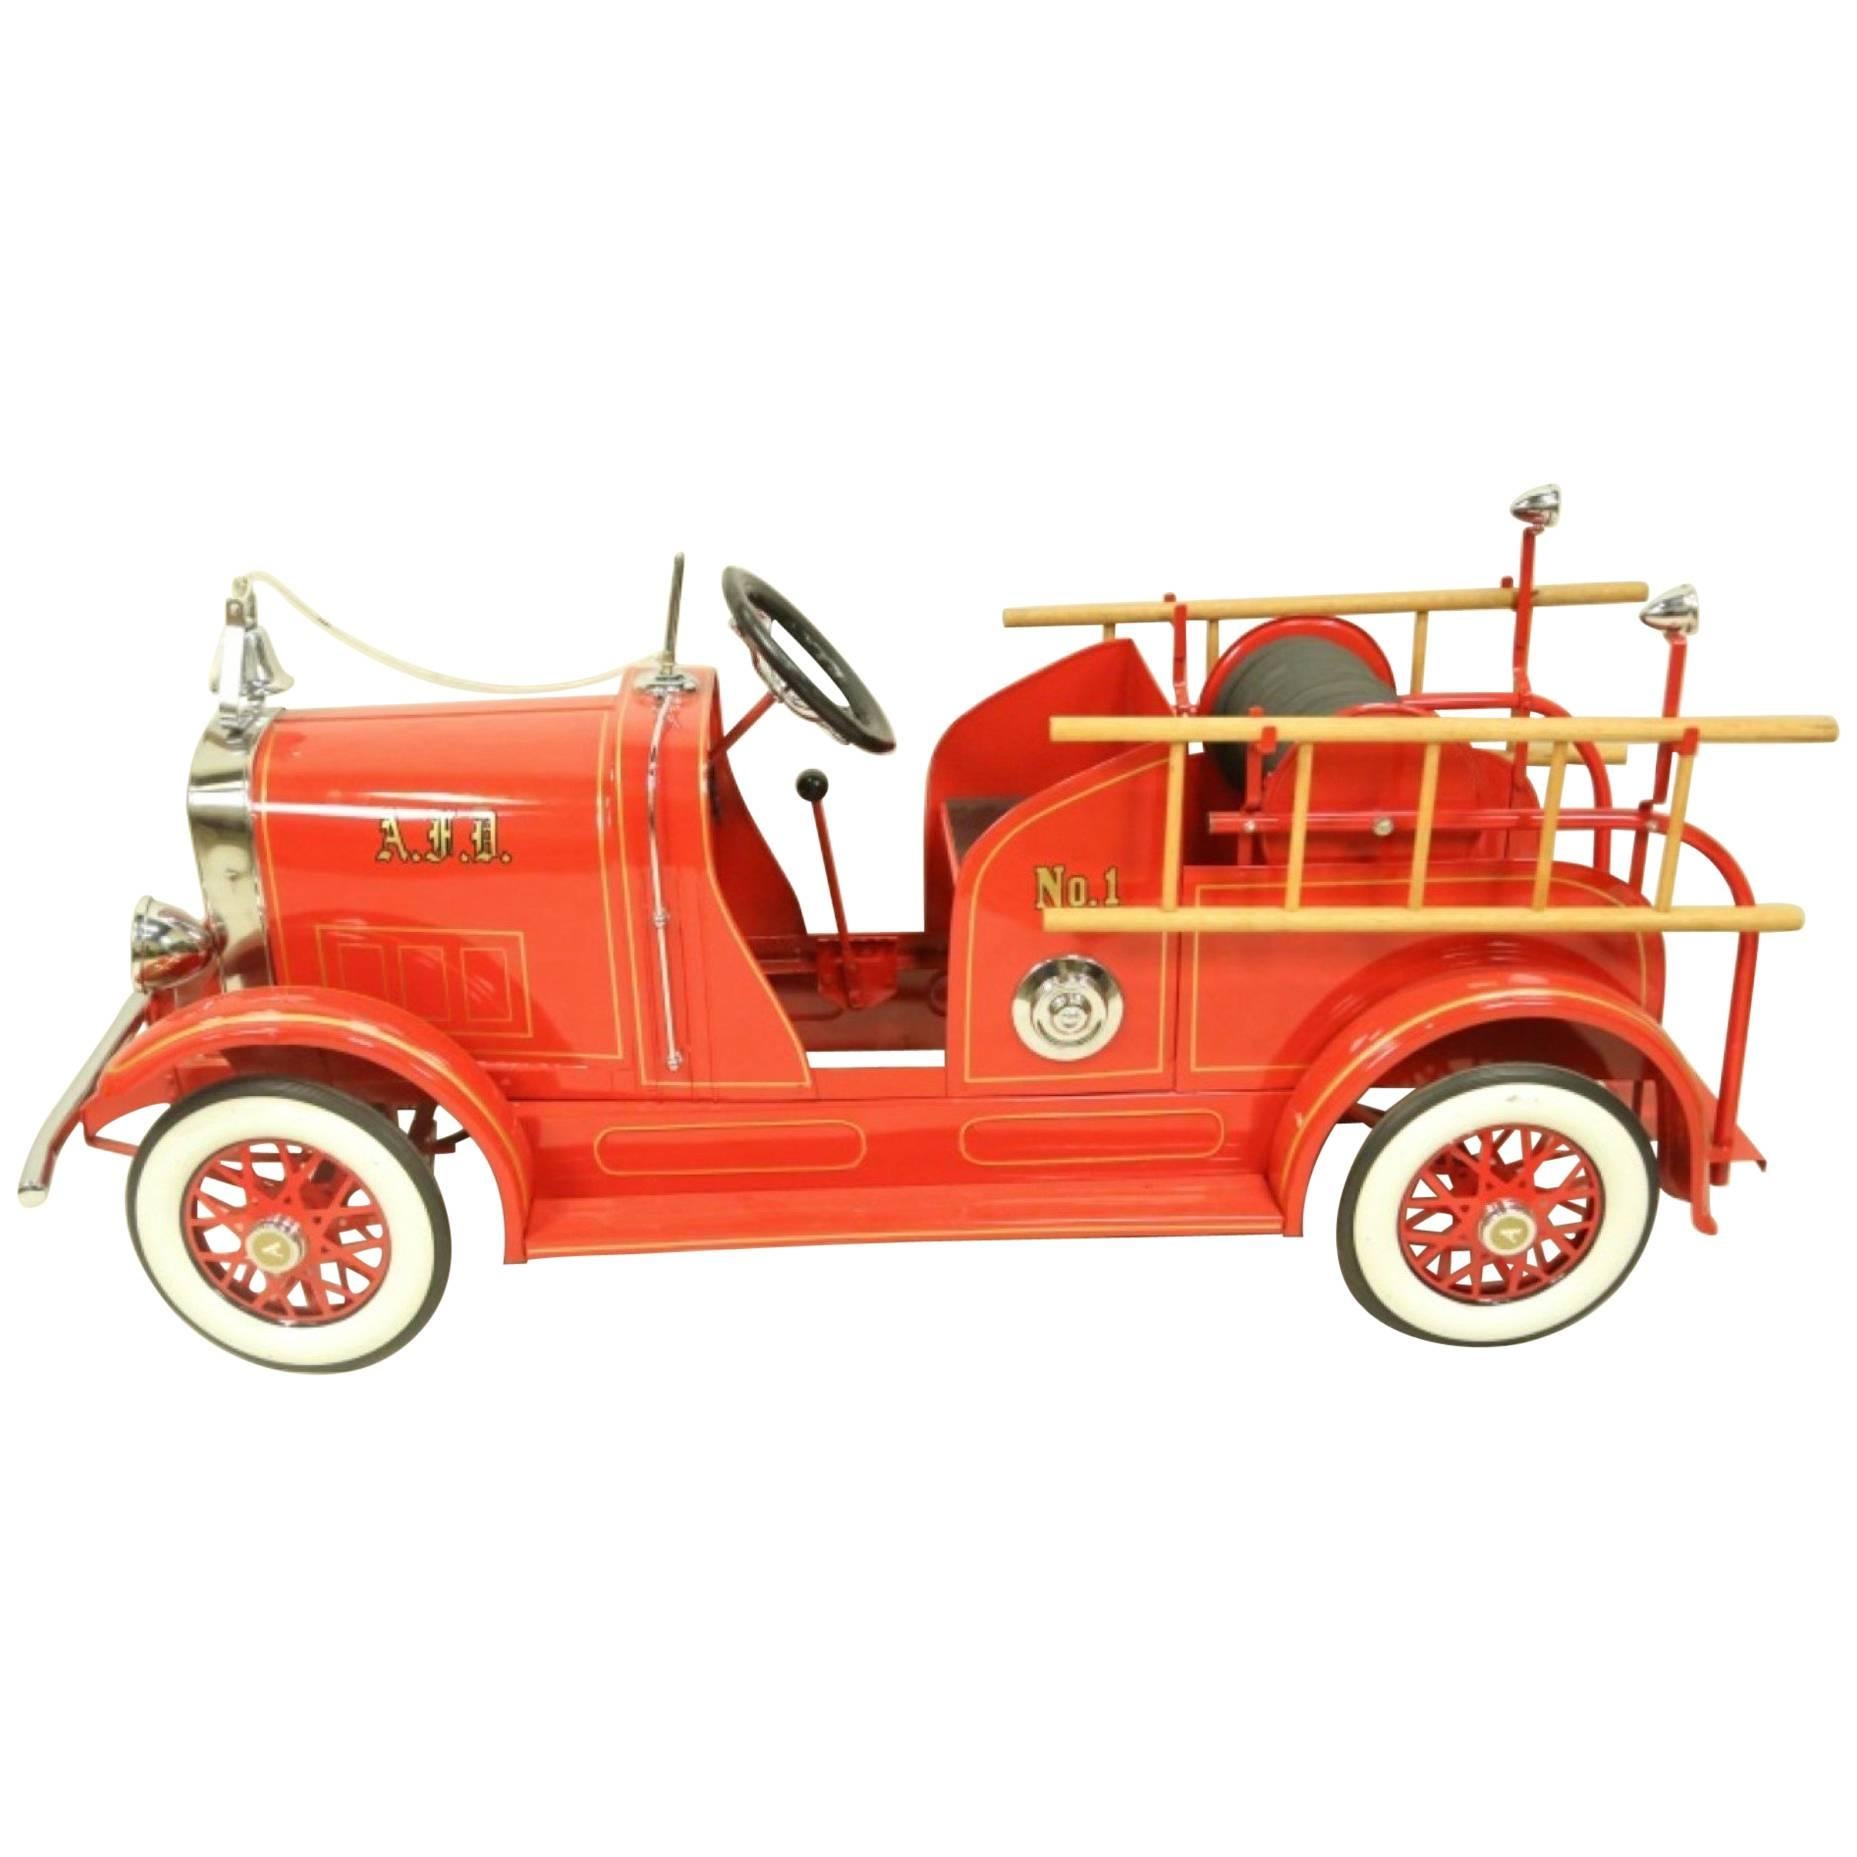 Vintage American National Pedal Fire Truck